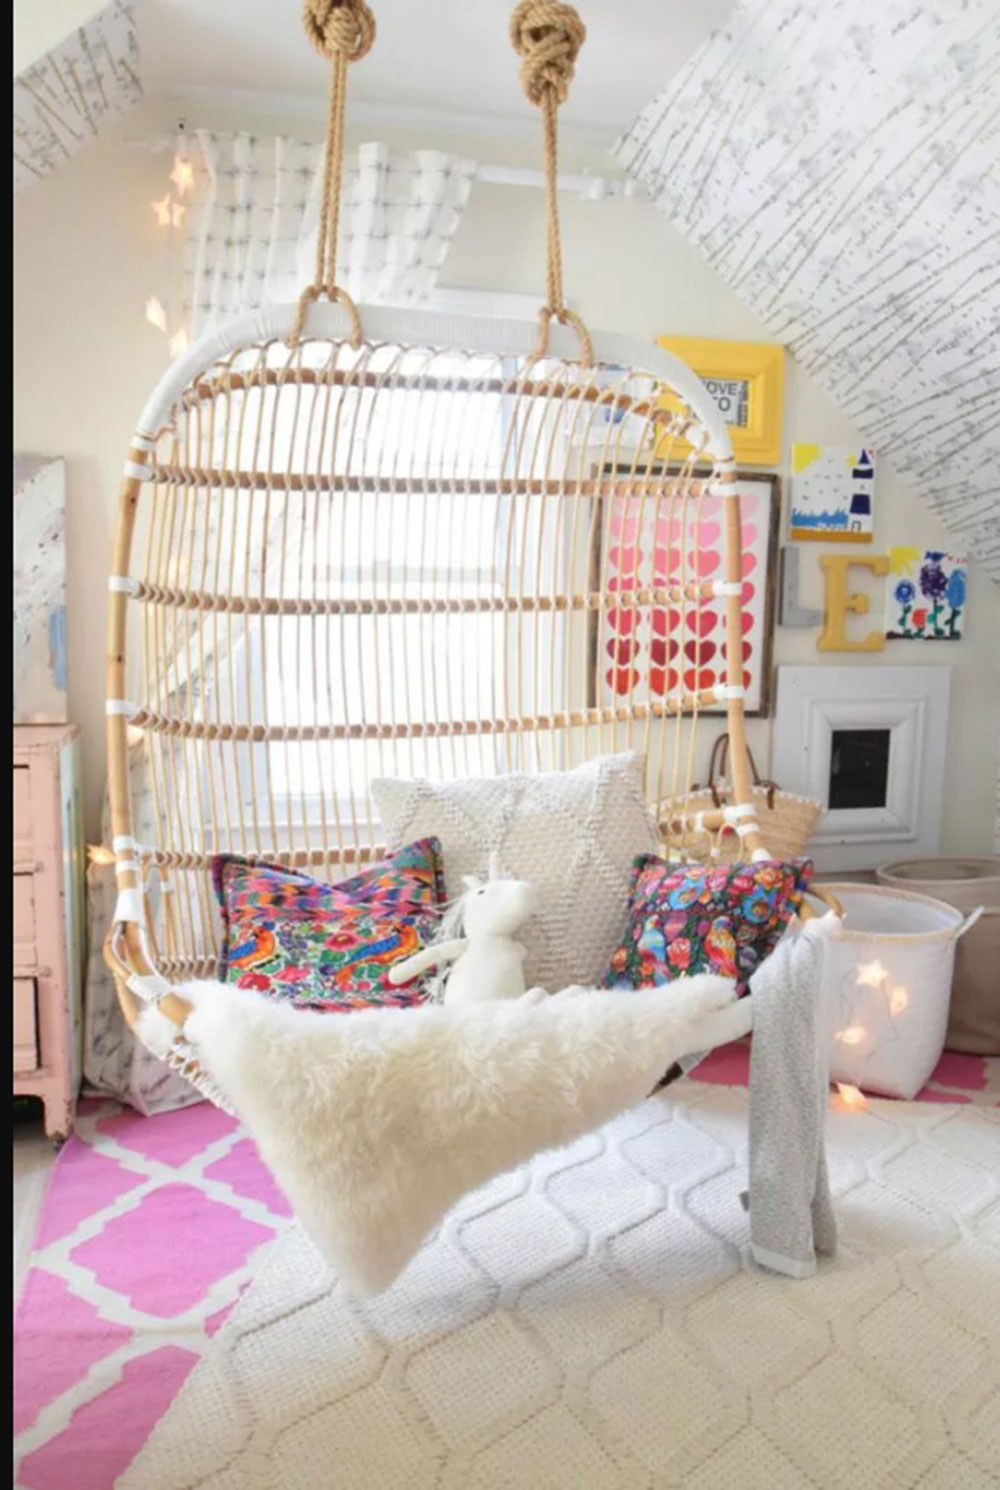 A-Swinging Cute Room Ideas That Your Daughter Will Love